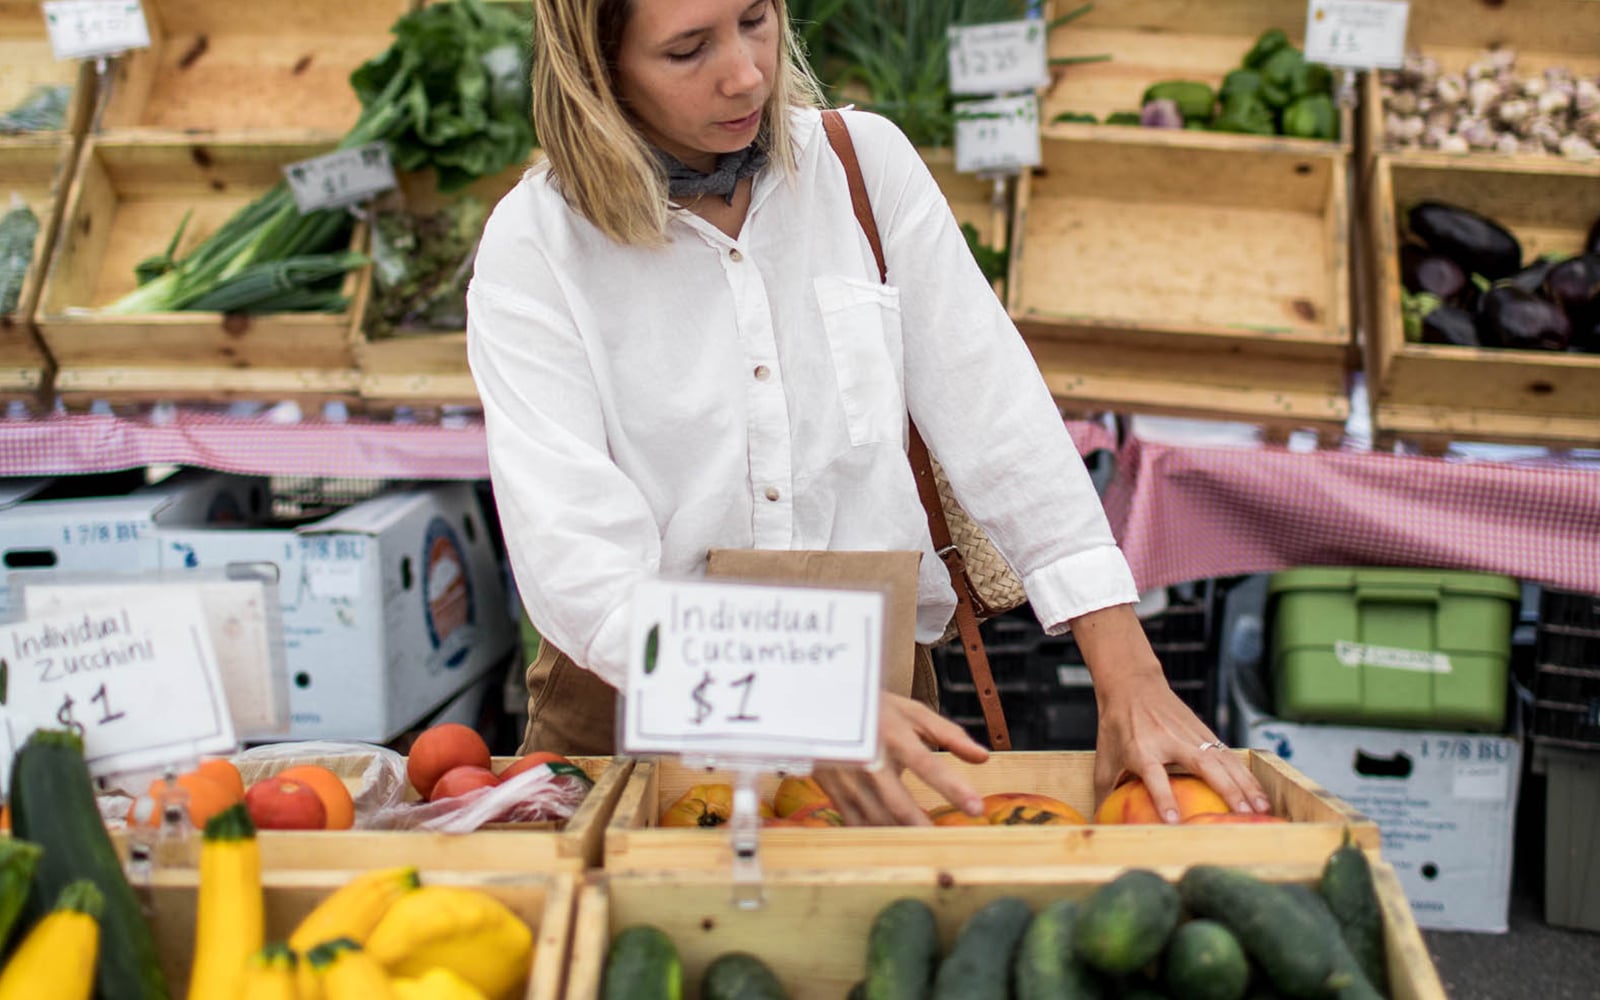 Michigan Farm Markets are at the heart of the food industry. Supporting local farmers is important for our enviroment and the cultiures in our states. Here is where I shop in my town and how I take care of my purchases at home. More on The Fresh Exchange.